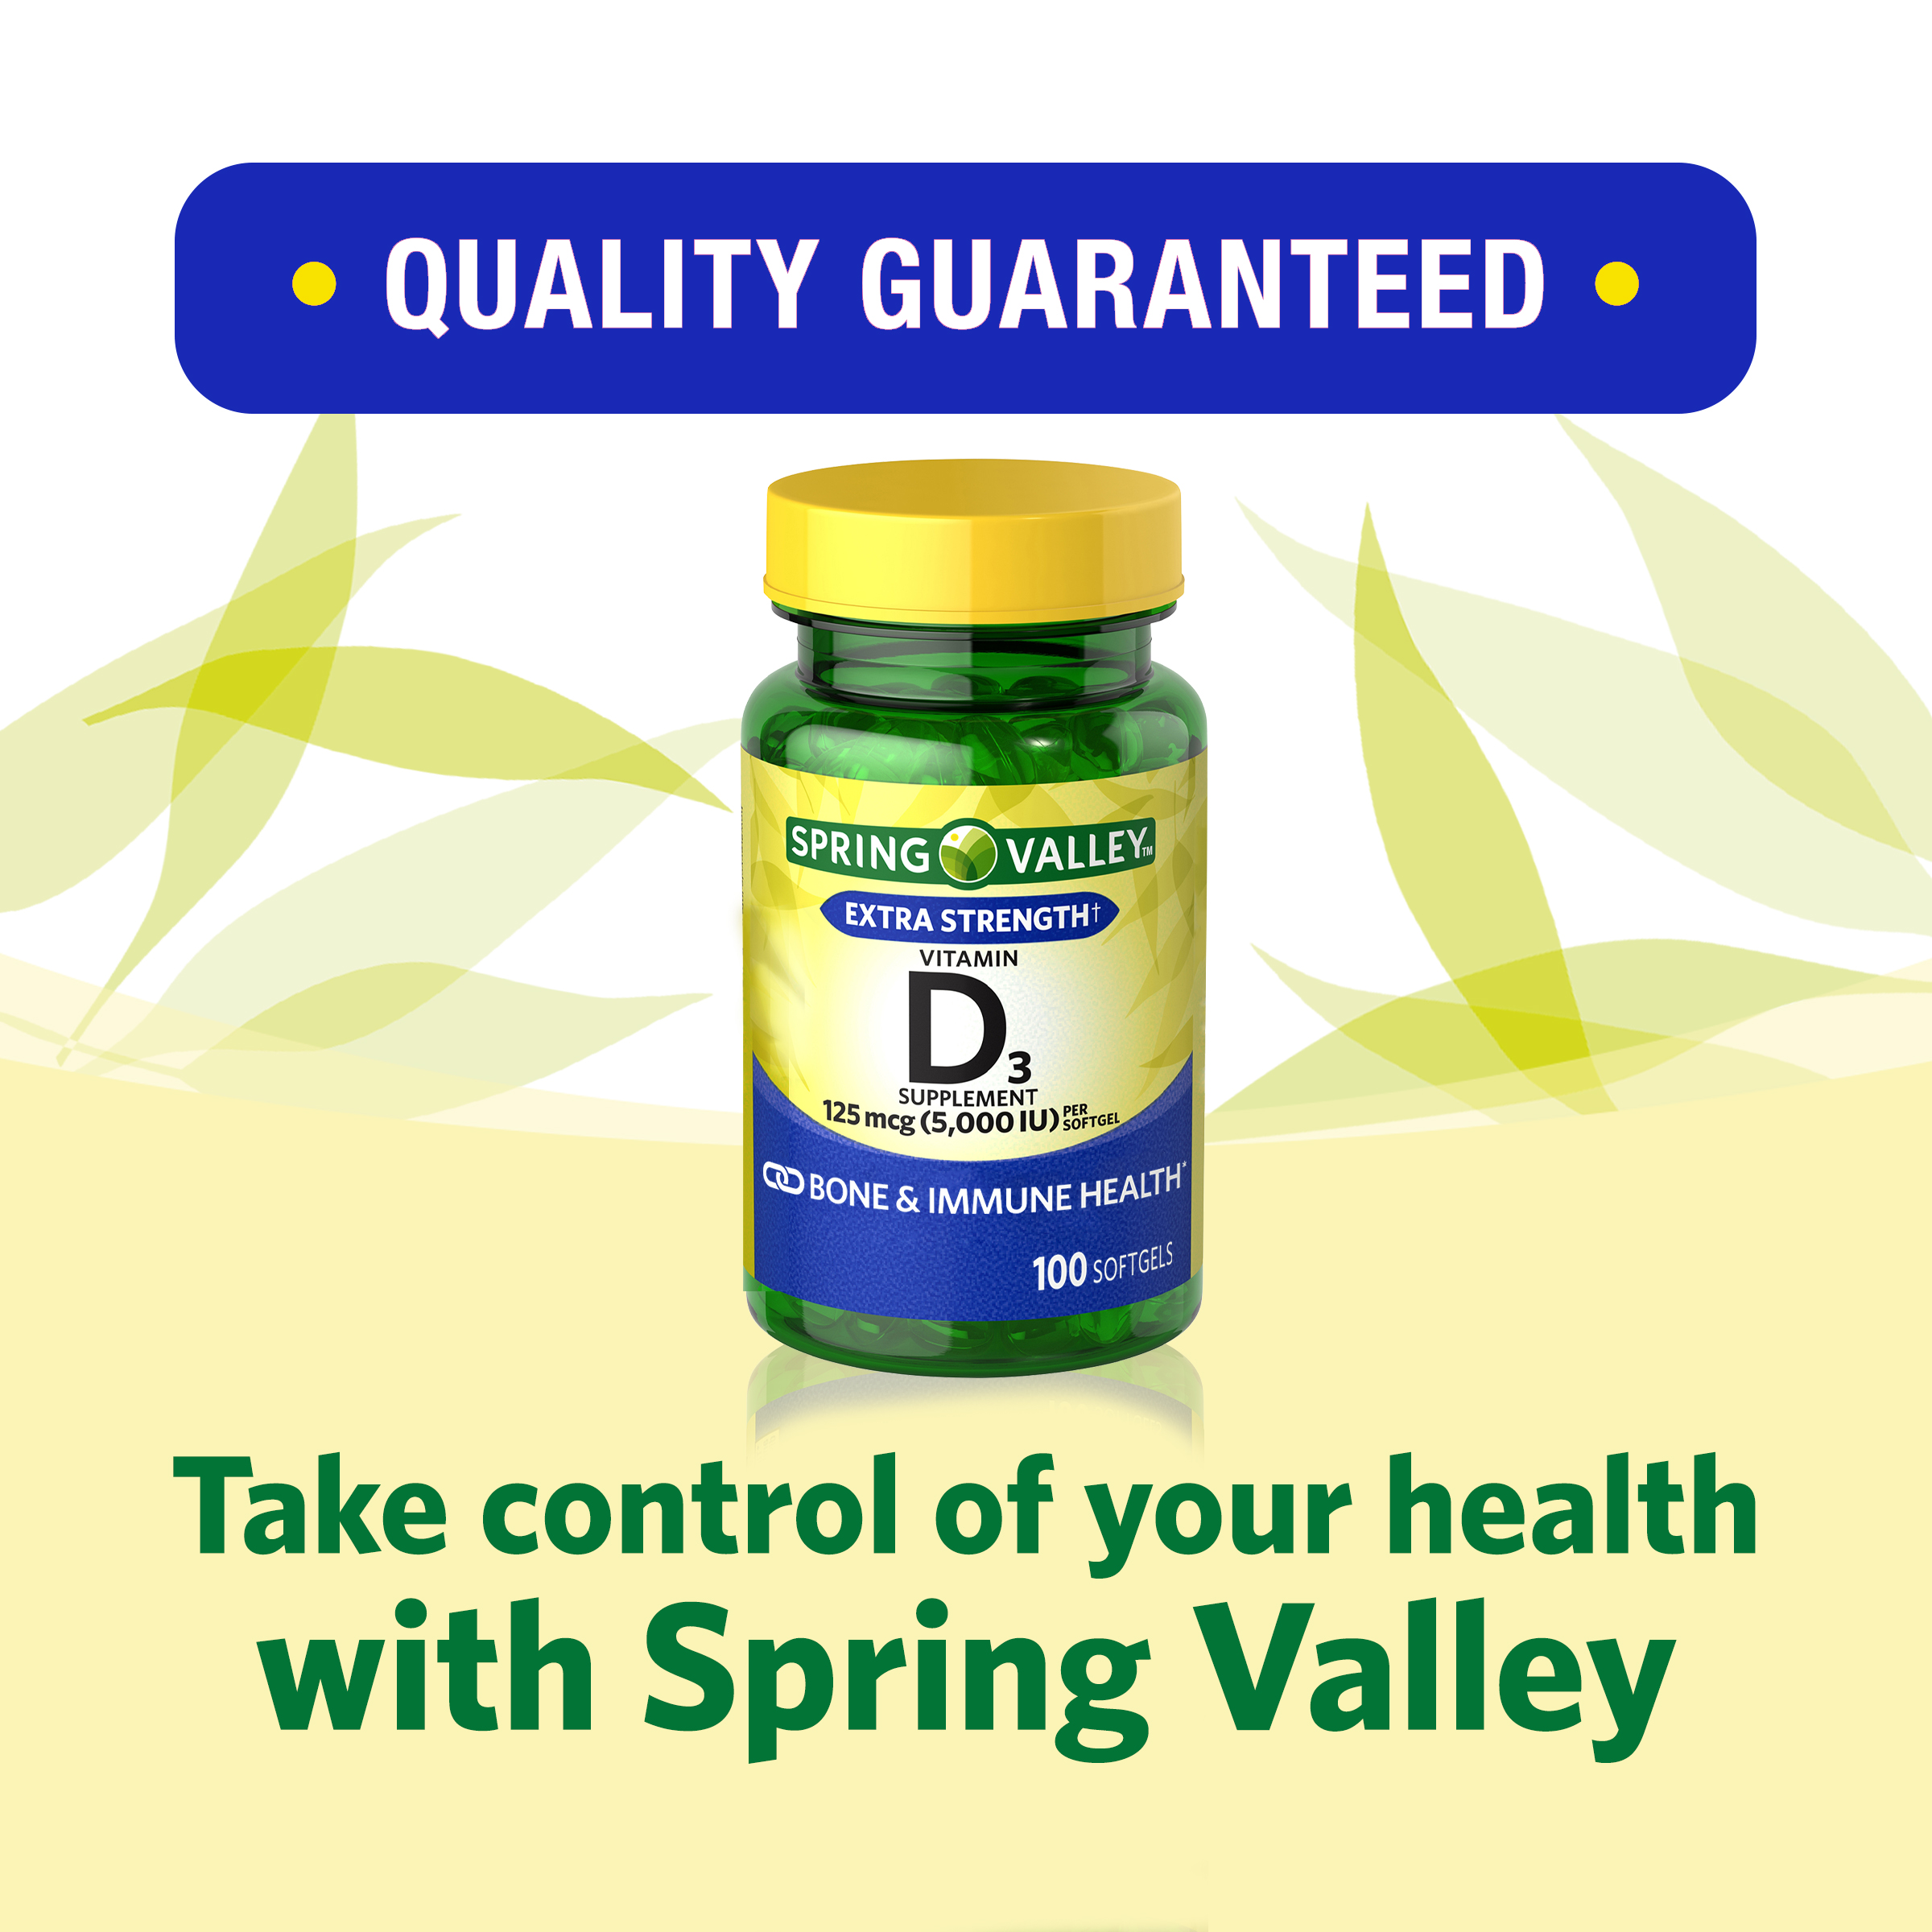 Spring Valley Vitamin D3 Softgels, 5000 IU, 100 Count - image 5 of 16